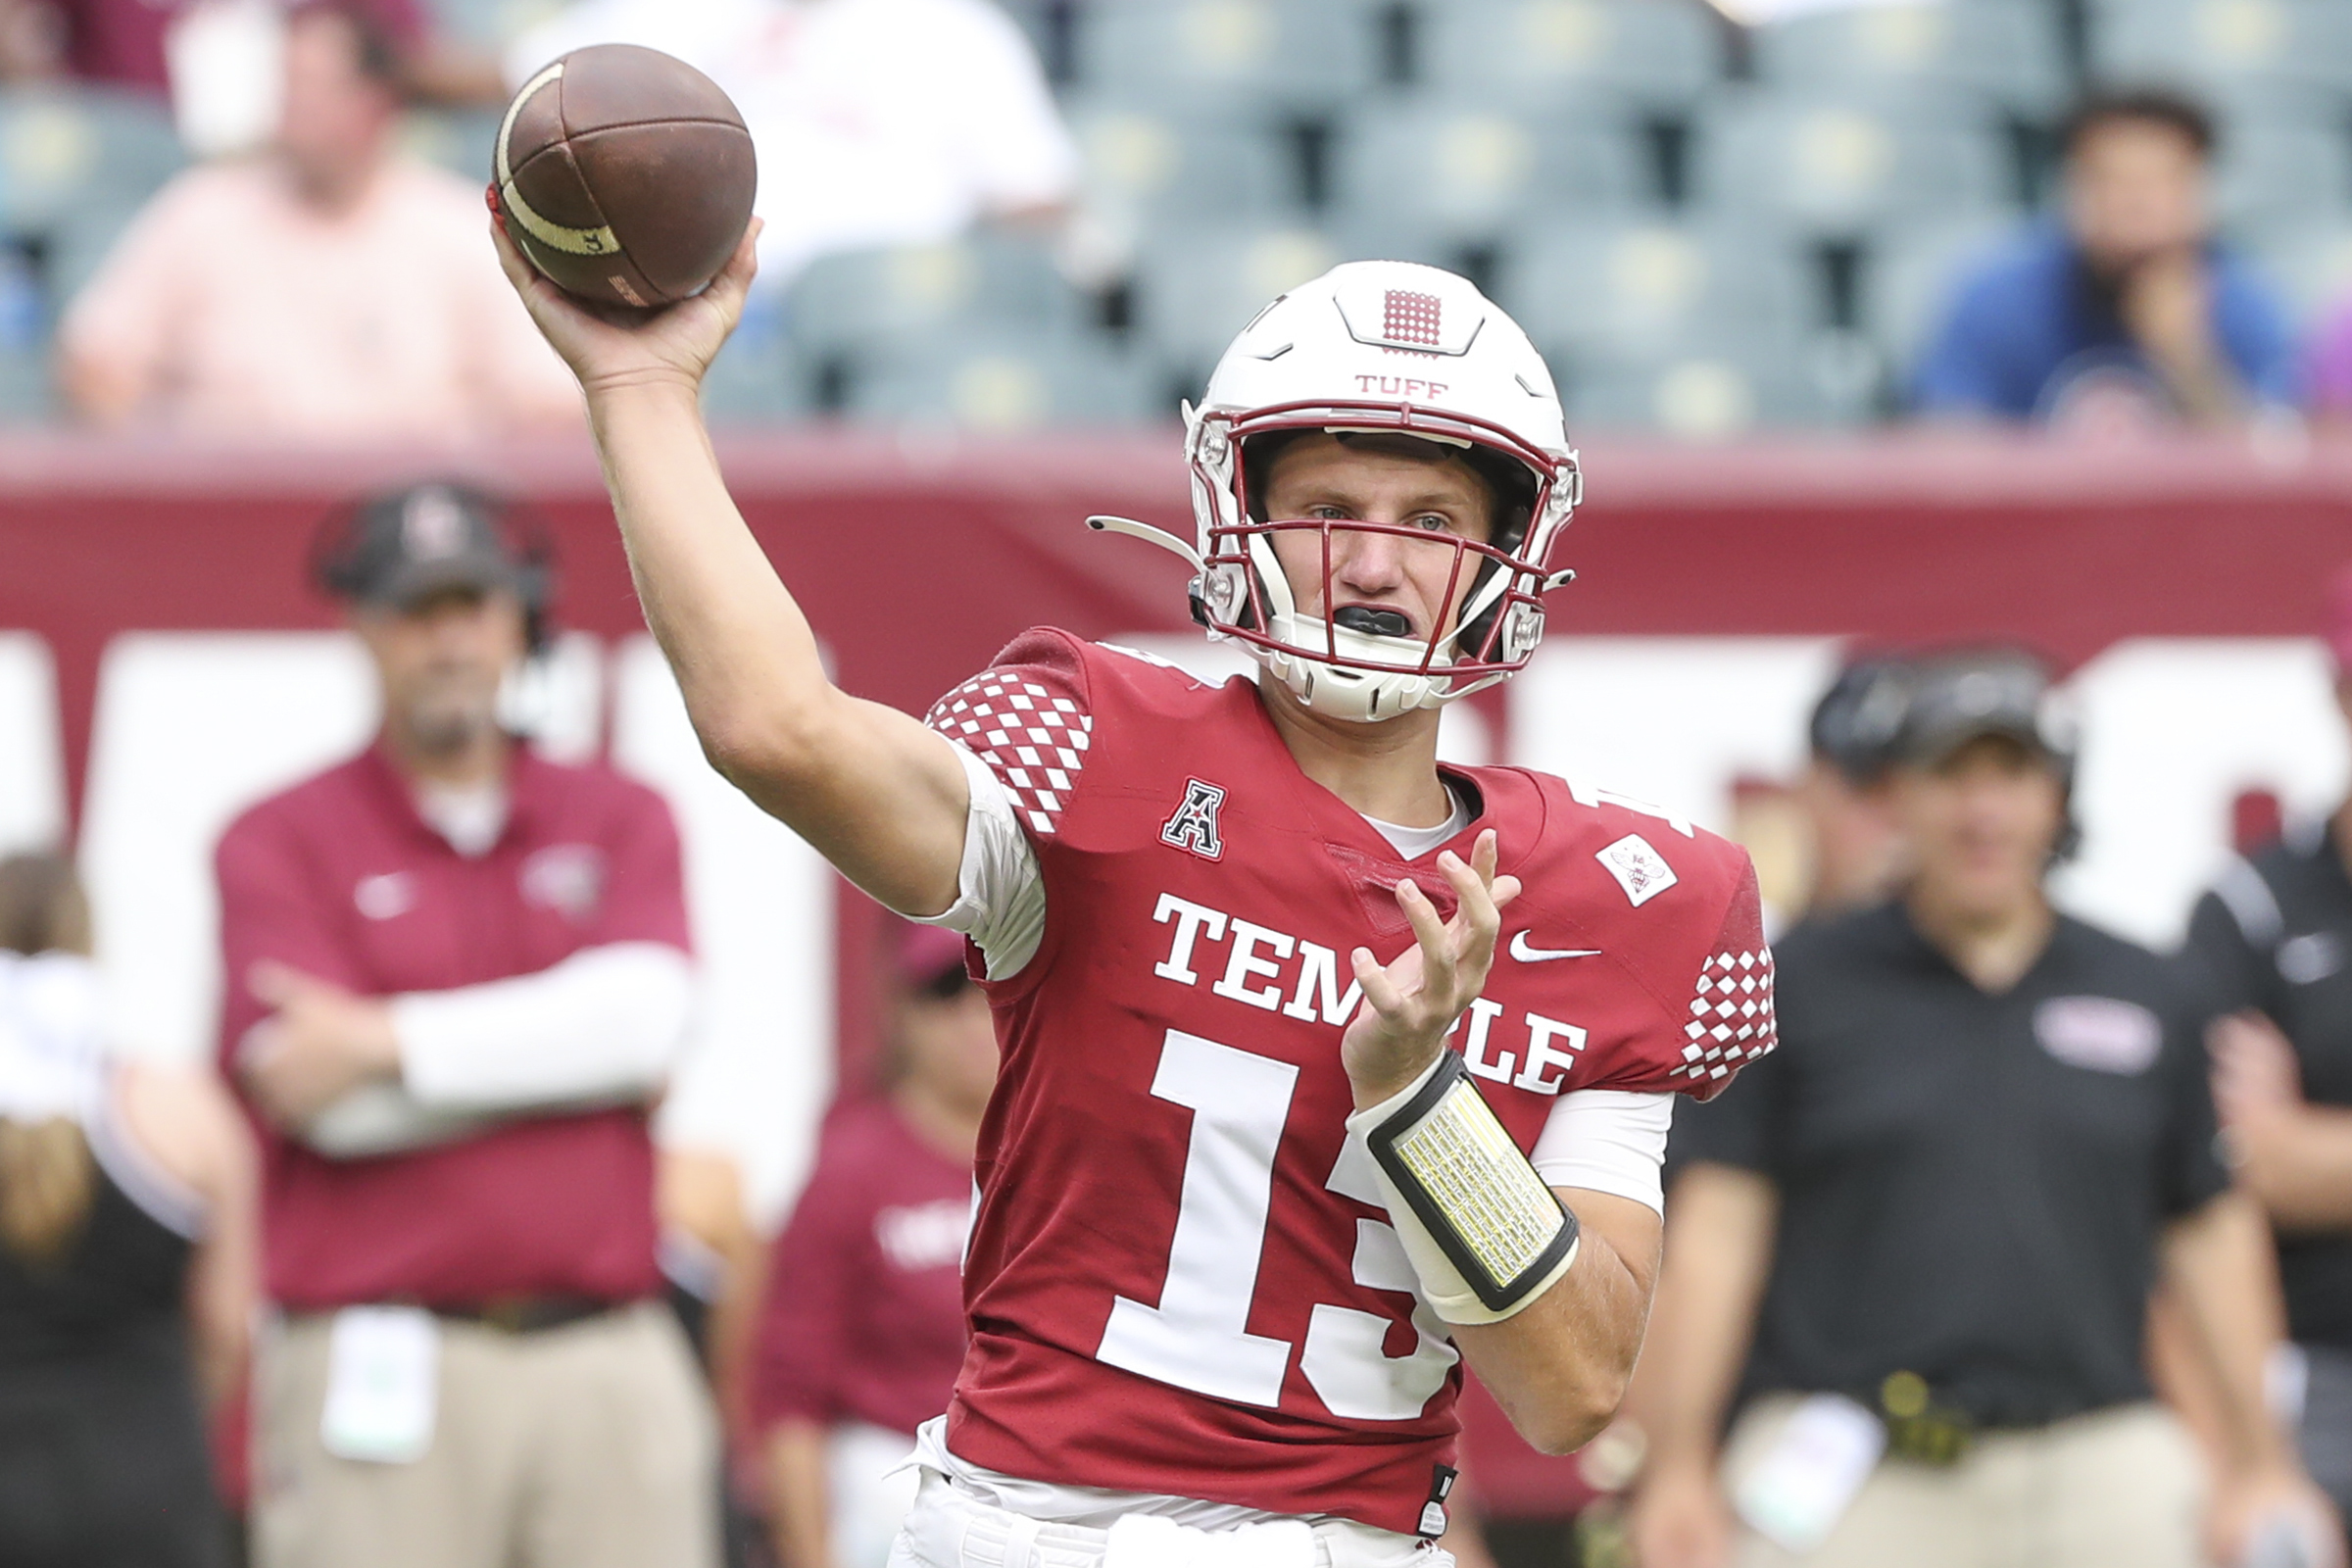 Temple freshman E.J. Warner will reportedly start at QB against